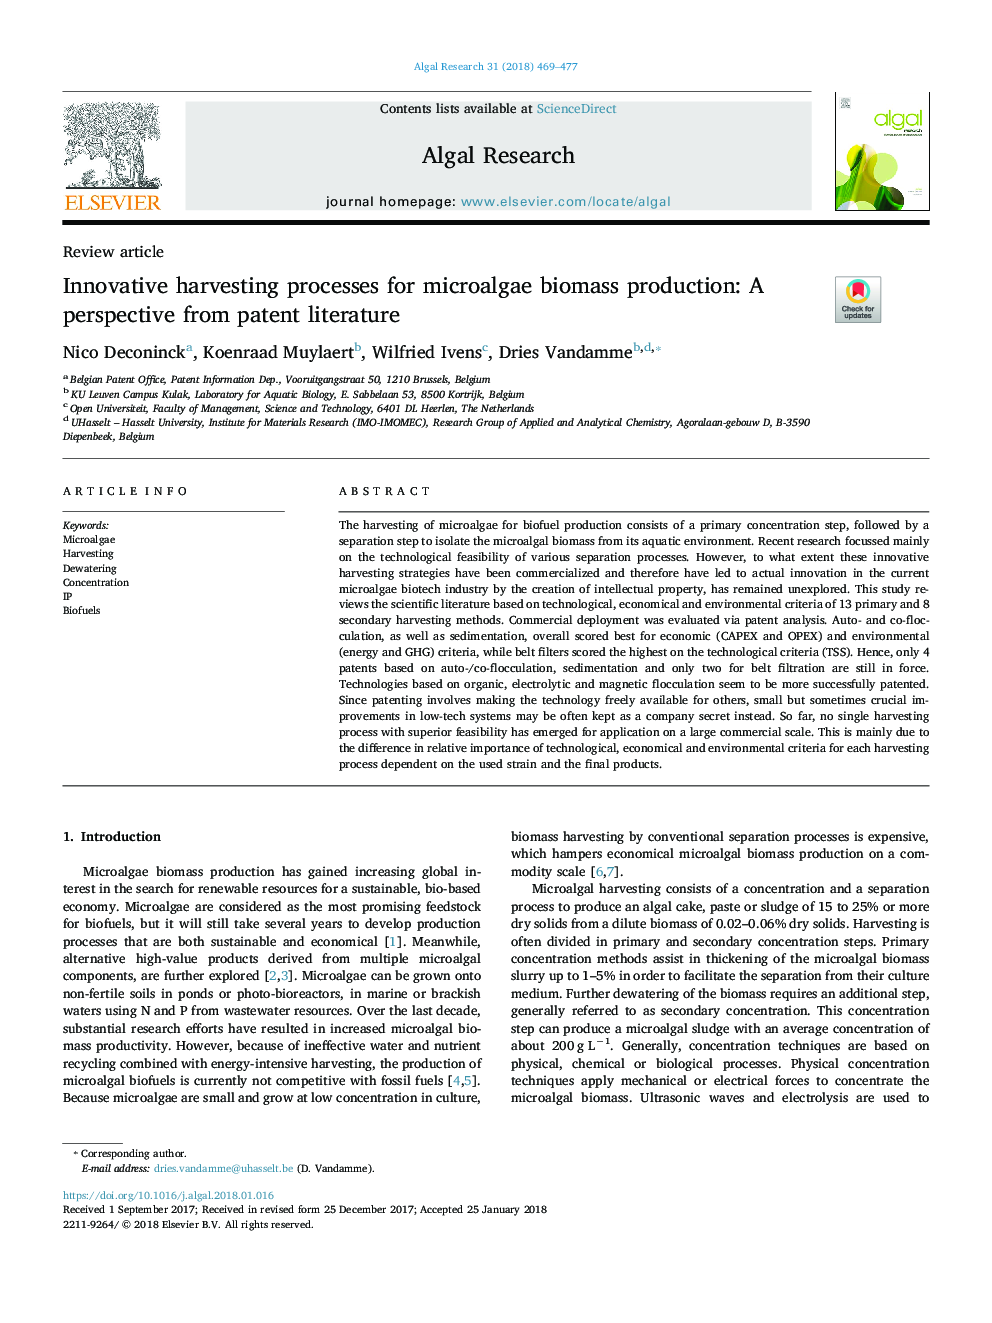 Innovative harvesting processes for microalgae biomass production: A perspective from patent literature